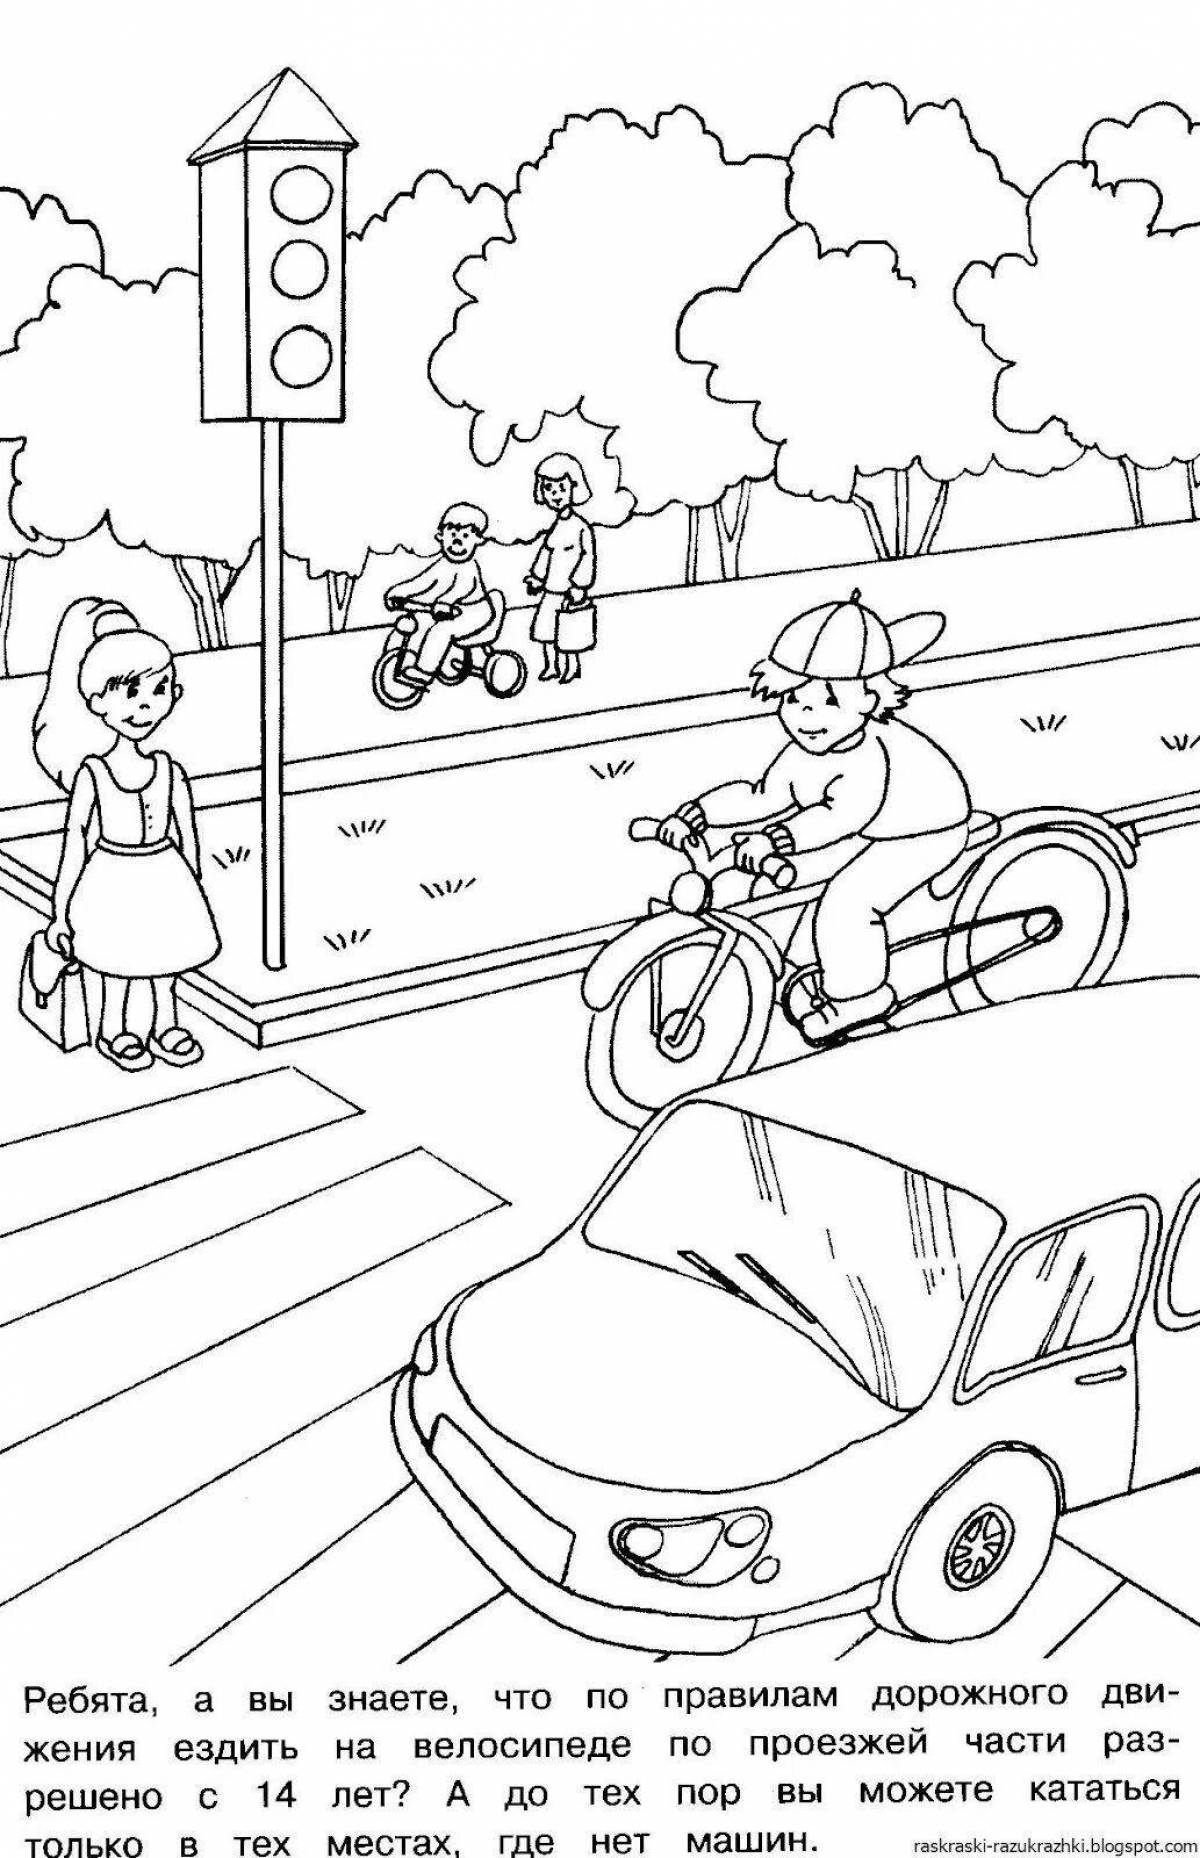 Crossroad Exploding Coloring Page